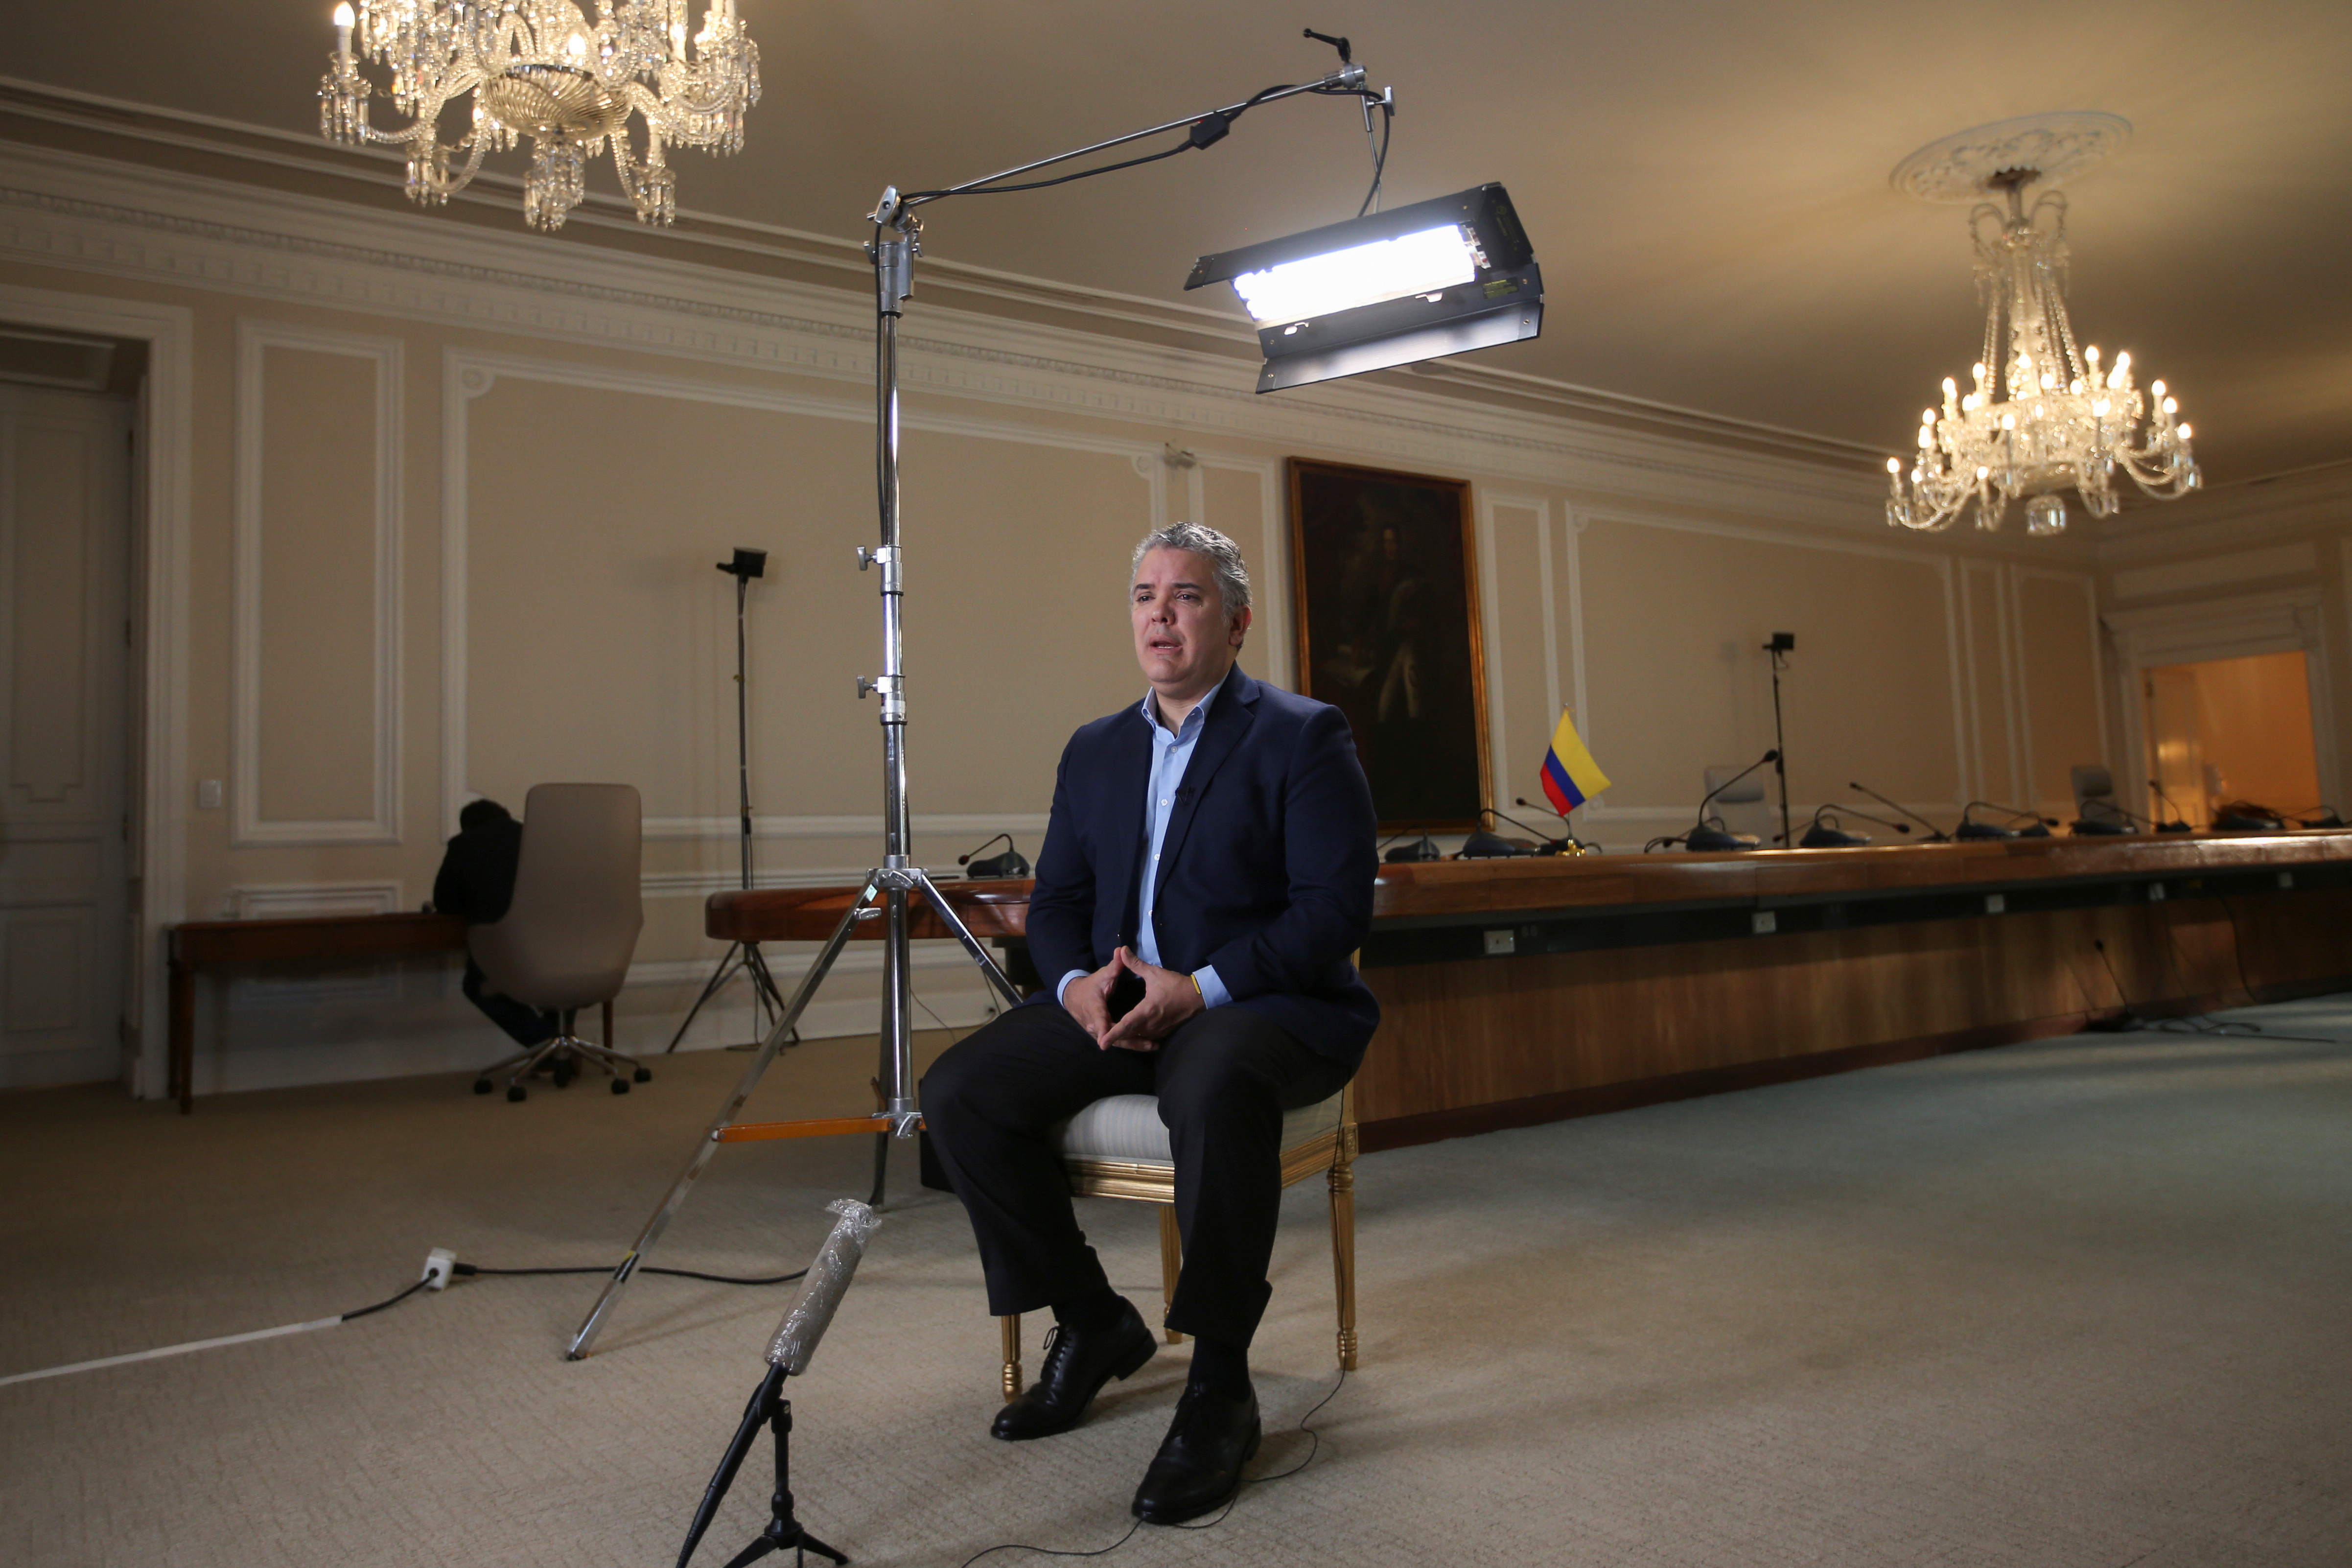 Colombia's President Ivan Duque speaks during an interview with Reuters, amid the outbreak of the coronavirus disease (COVID-19), in Bogota, Colombia June 26, 2020. REUTERS/Luisa Gonzalez